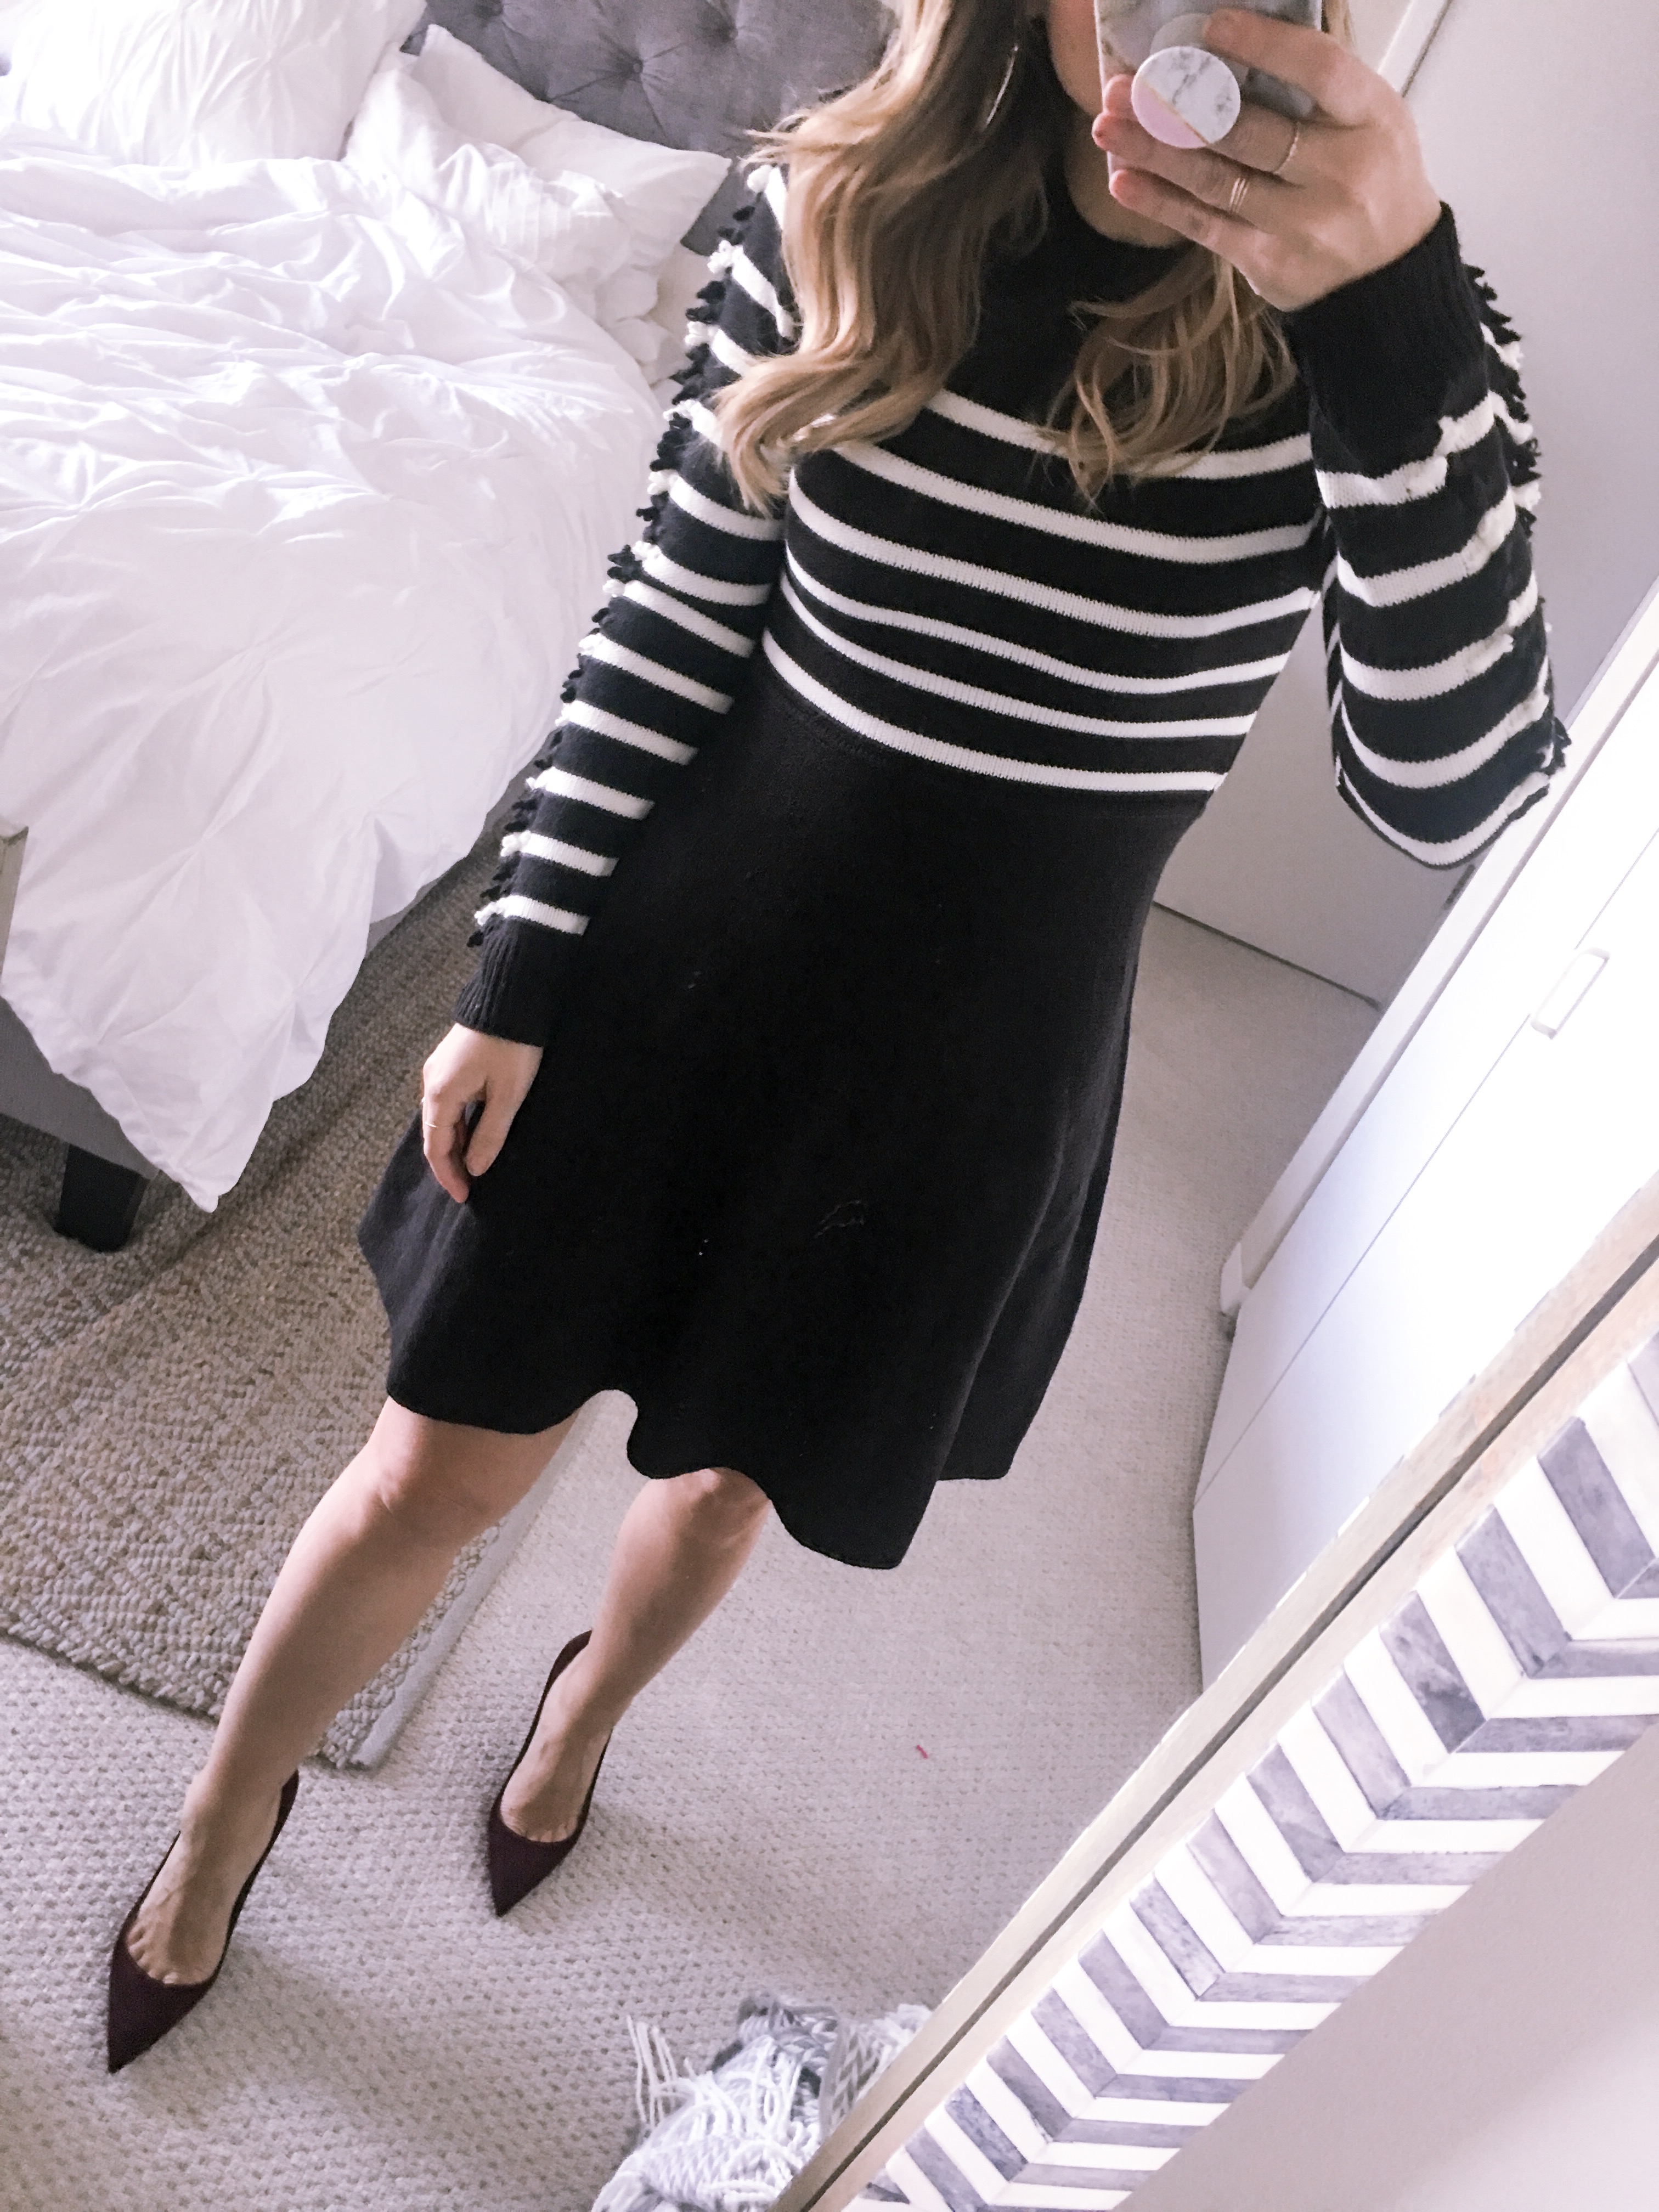 Striped Fit and Flare Sweater dress from Eliza J at Nordstrom with Black Sam Edelman Hazel Pumps.